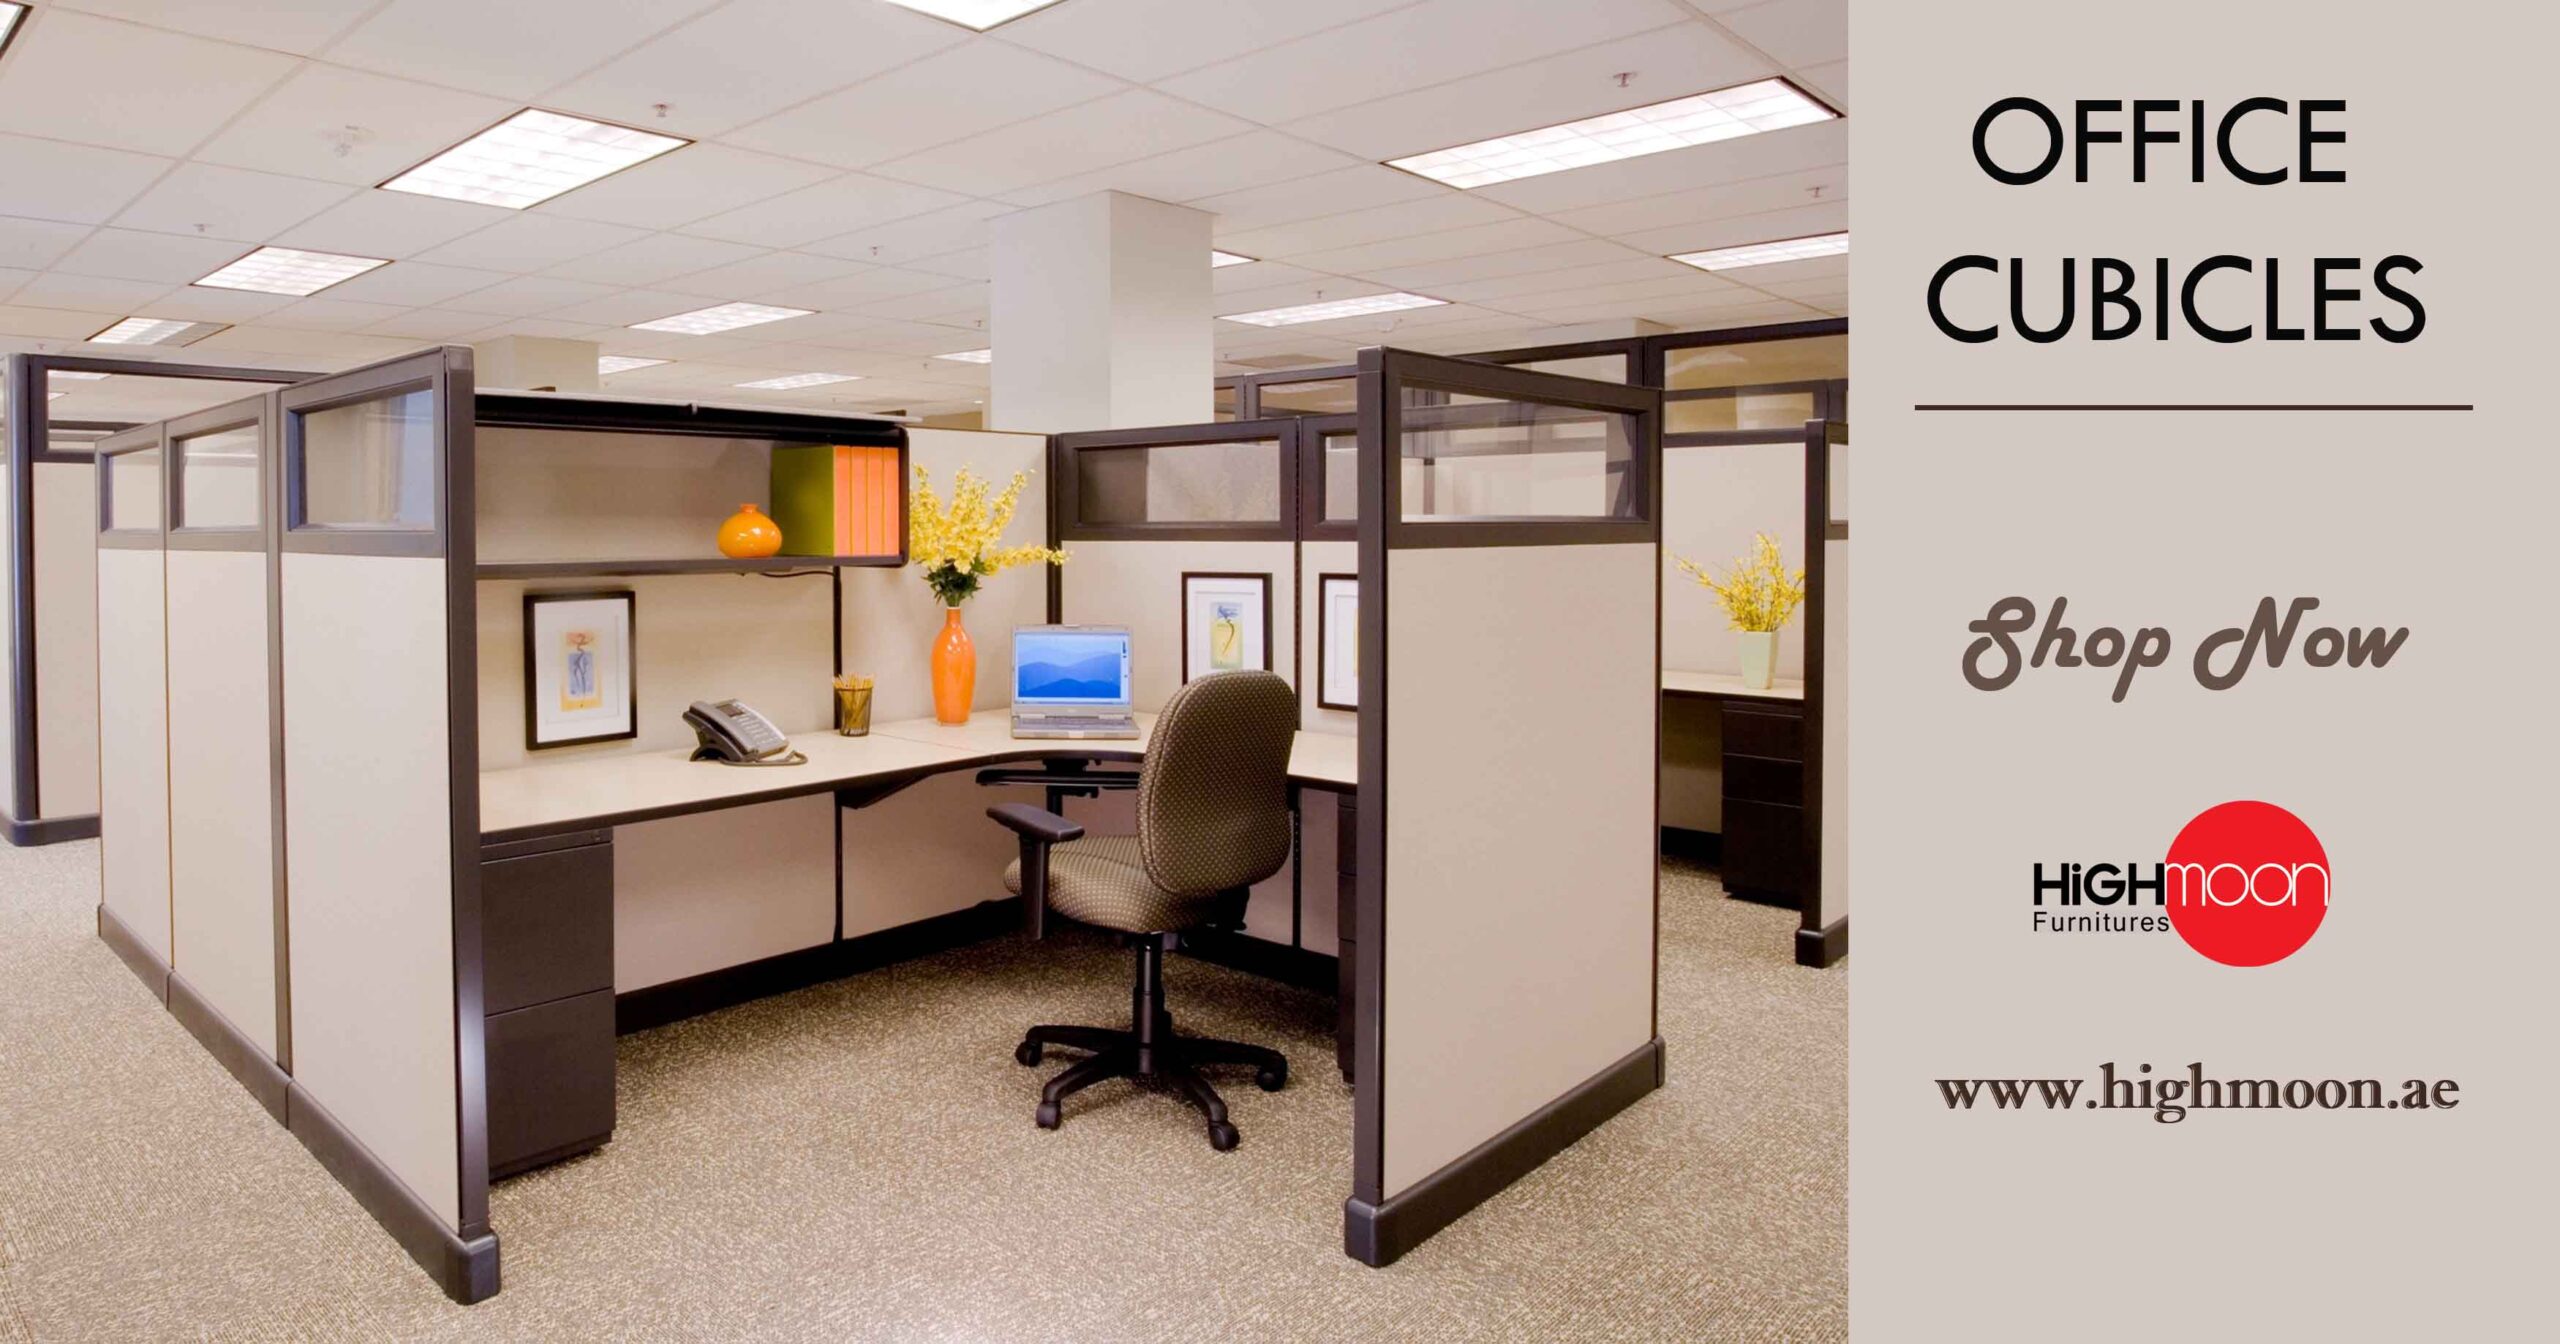 Buy High-Quality Office Cubicles in Dubai | Premium Office Cubicles